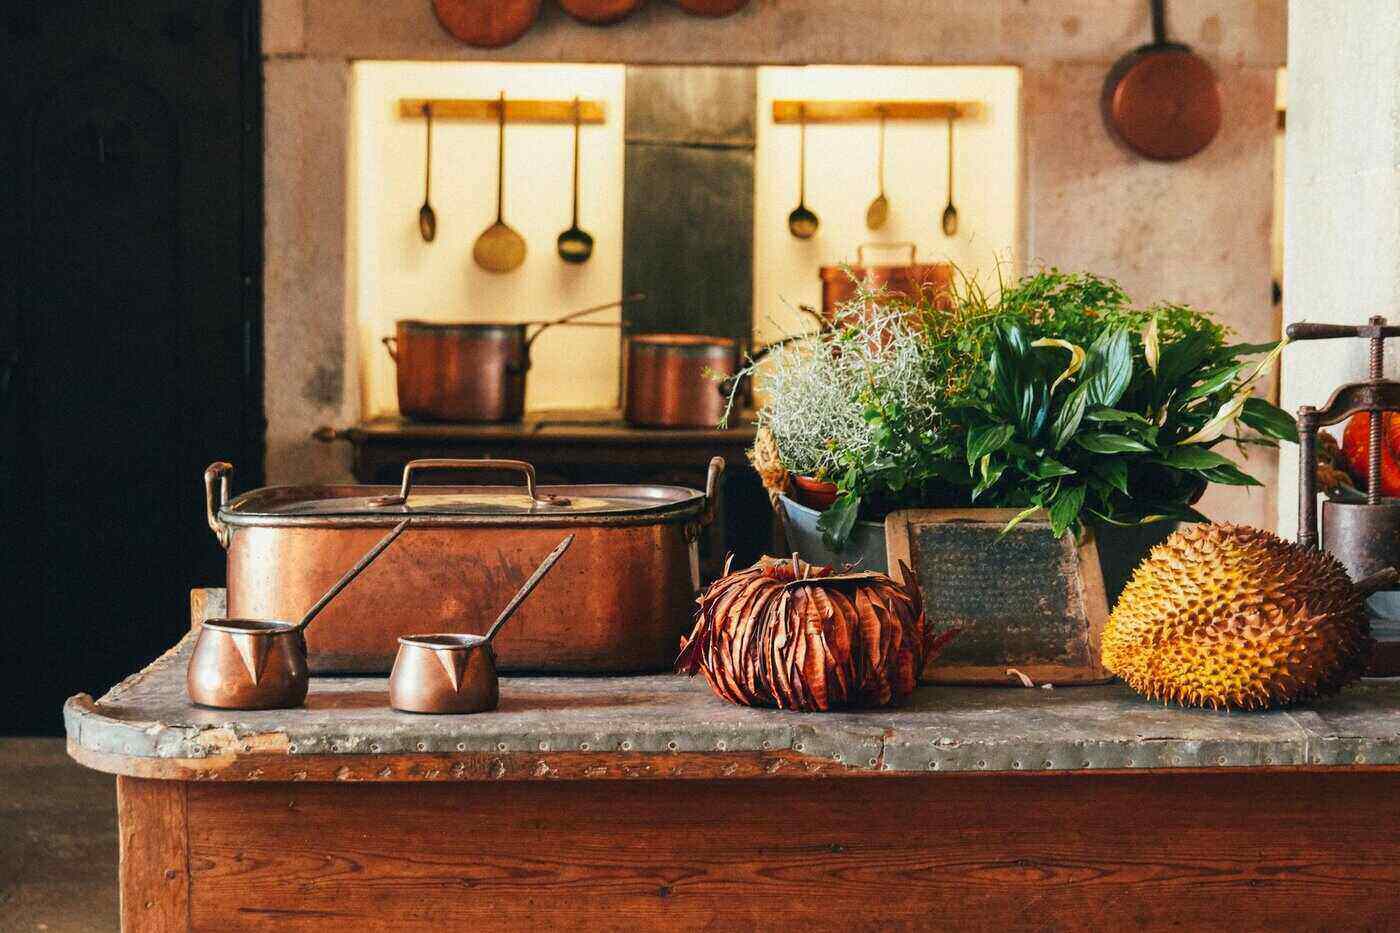 copper pots and pans in kitchen - tips for choosing eco-friendly cookware